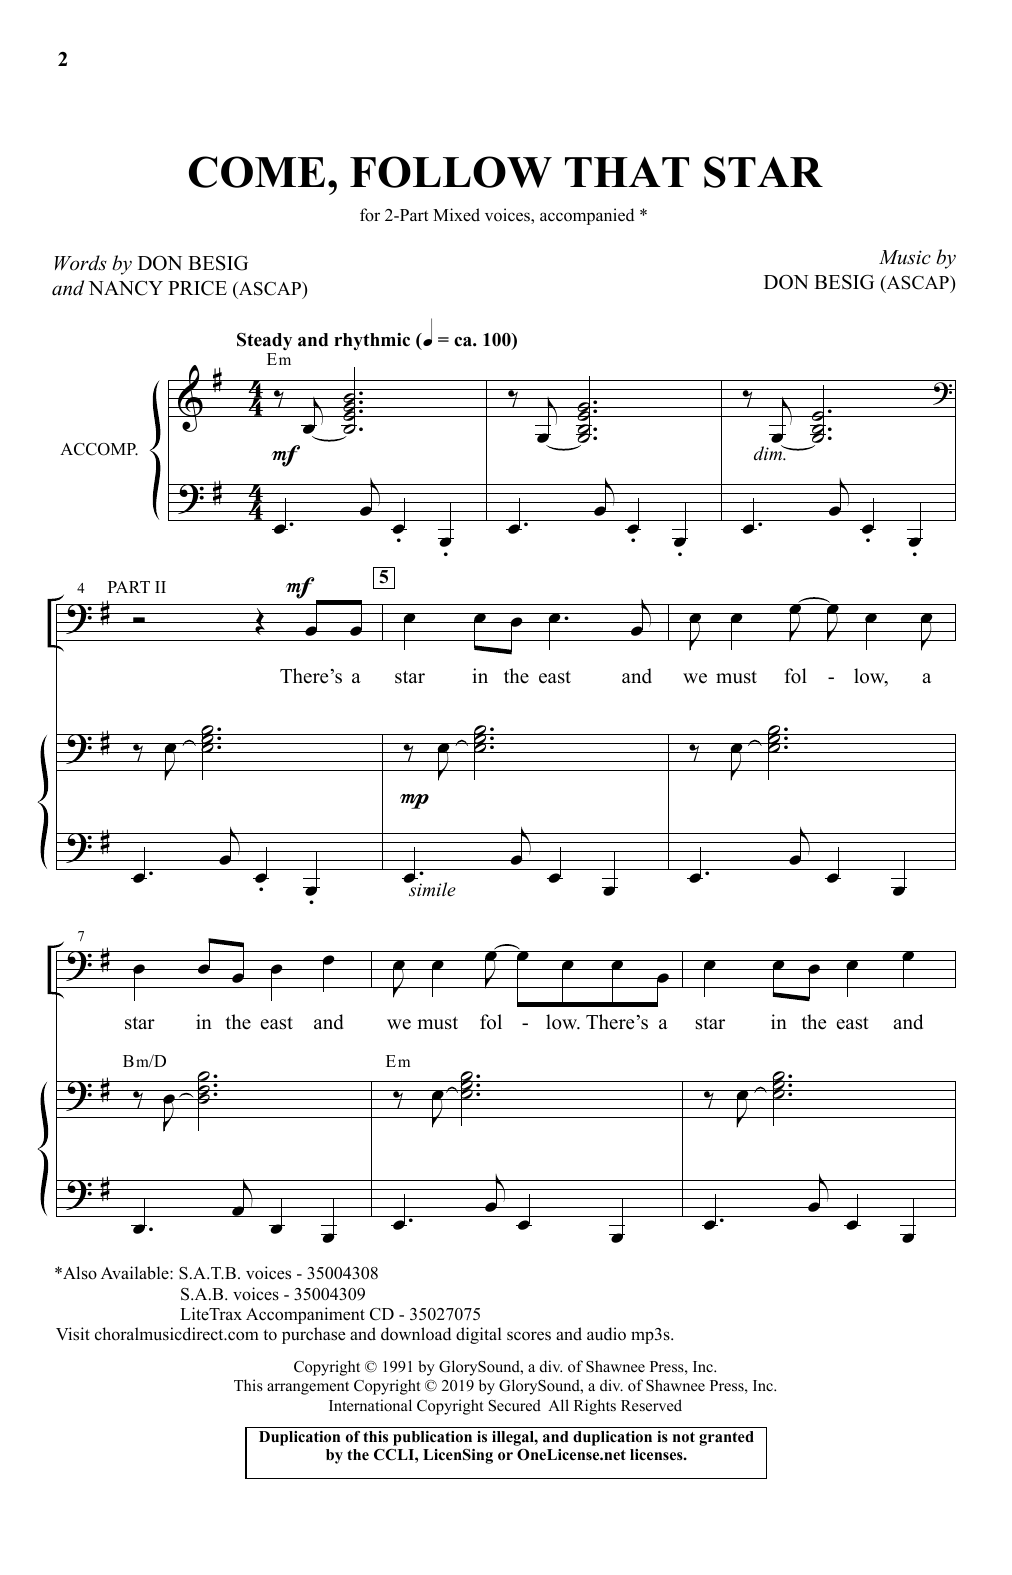 Don Besig & Nancy Price Come, Follow That Star sheet music notes and chords. Download Printable PDF.